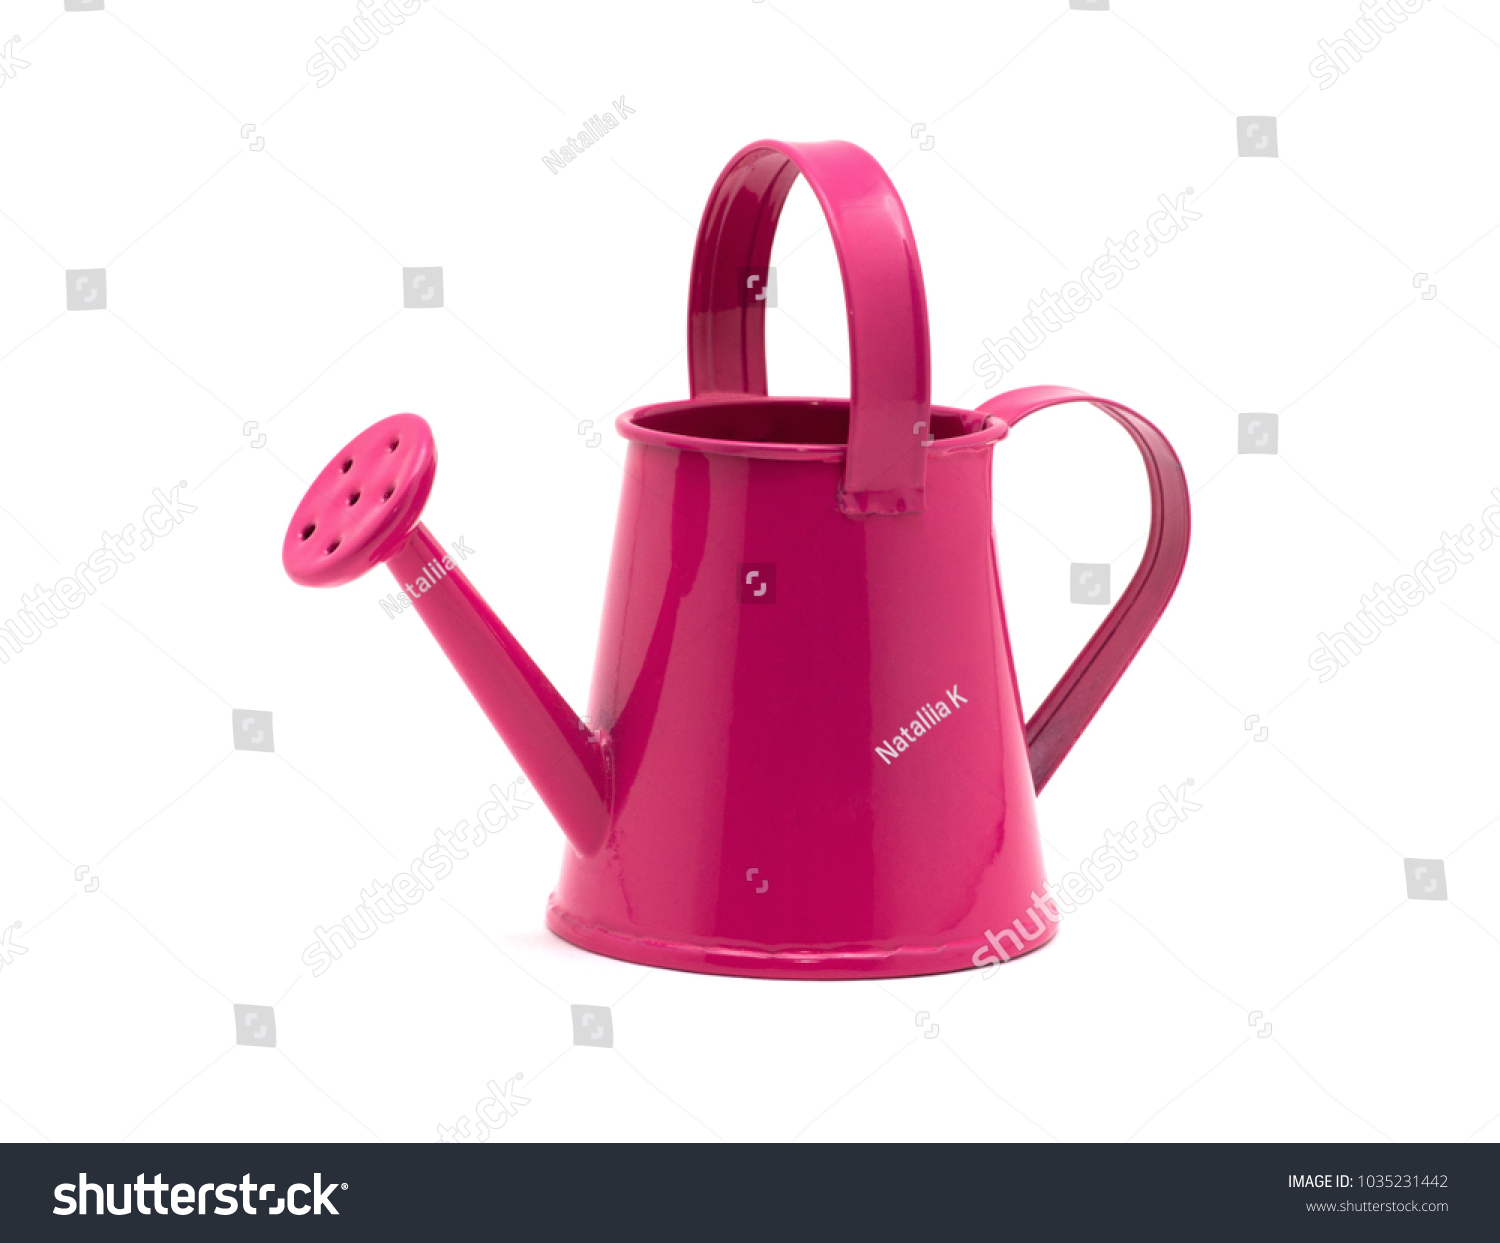 Pink watering can isolated on a white background #1035231442